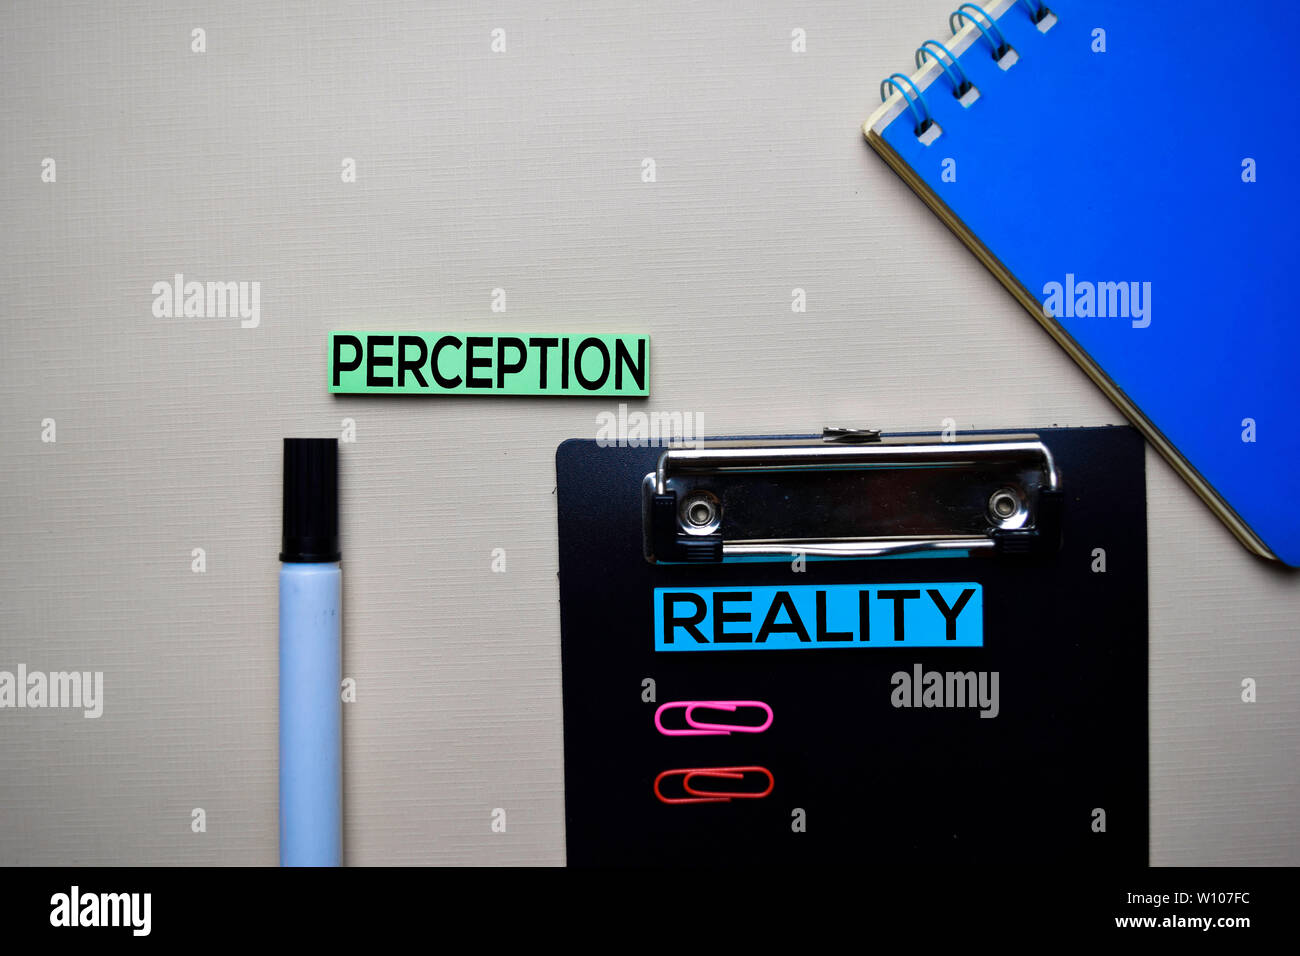 Perception or Reality text on sticky notes with office desk concept Stock Photo